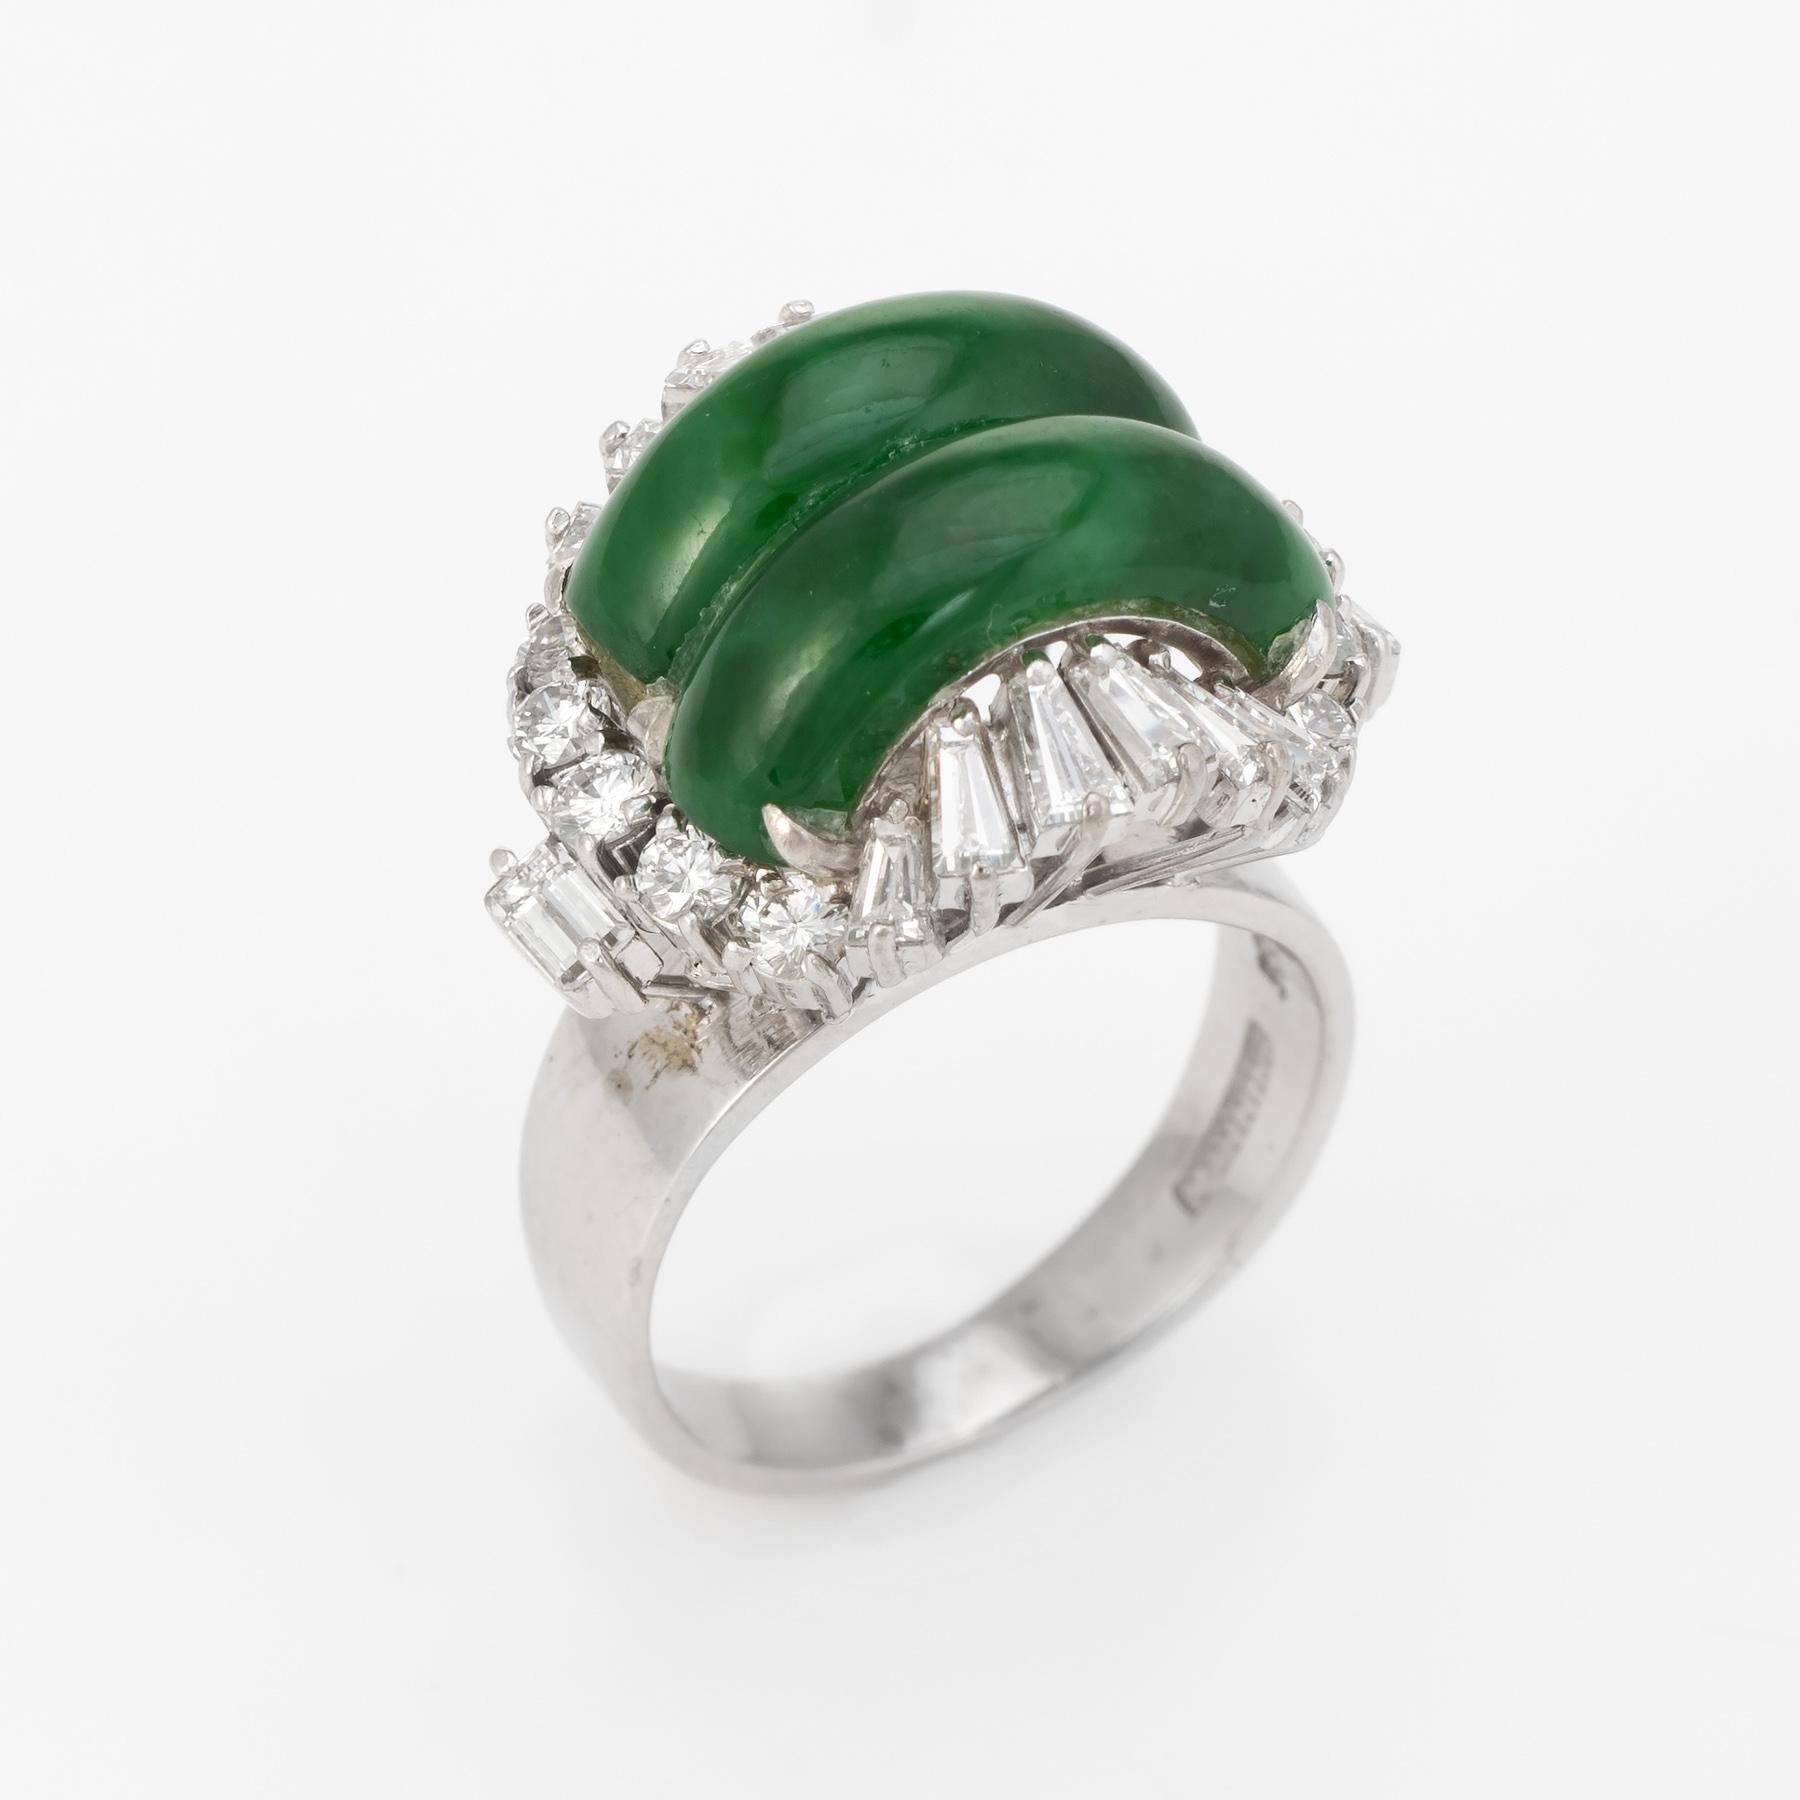 Elegant vintage jadeite & diamond cocktail ring (circa 1950s to 1960s), crafted in 14 karat white gold. 

Cabochon cut jade measures 14mm x 5mm (each), accented with an estimated 0.78 carats of mixed cut diamonds (Round brilliant, straight and